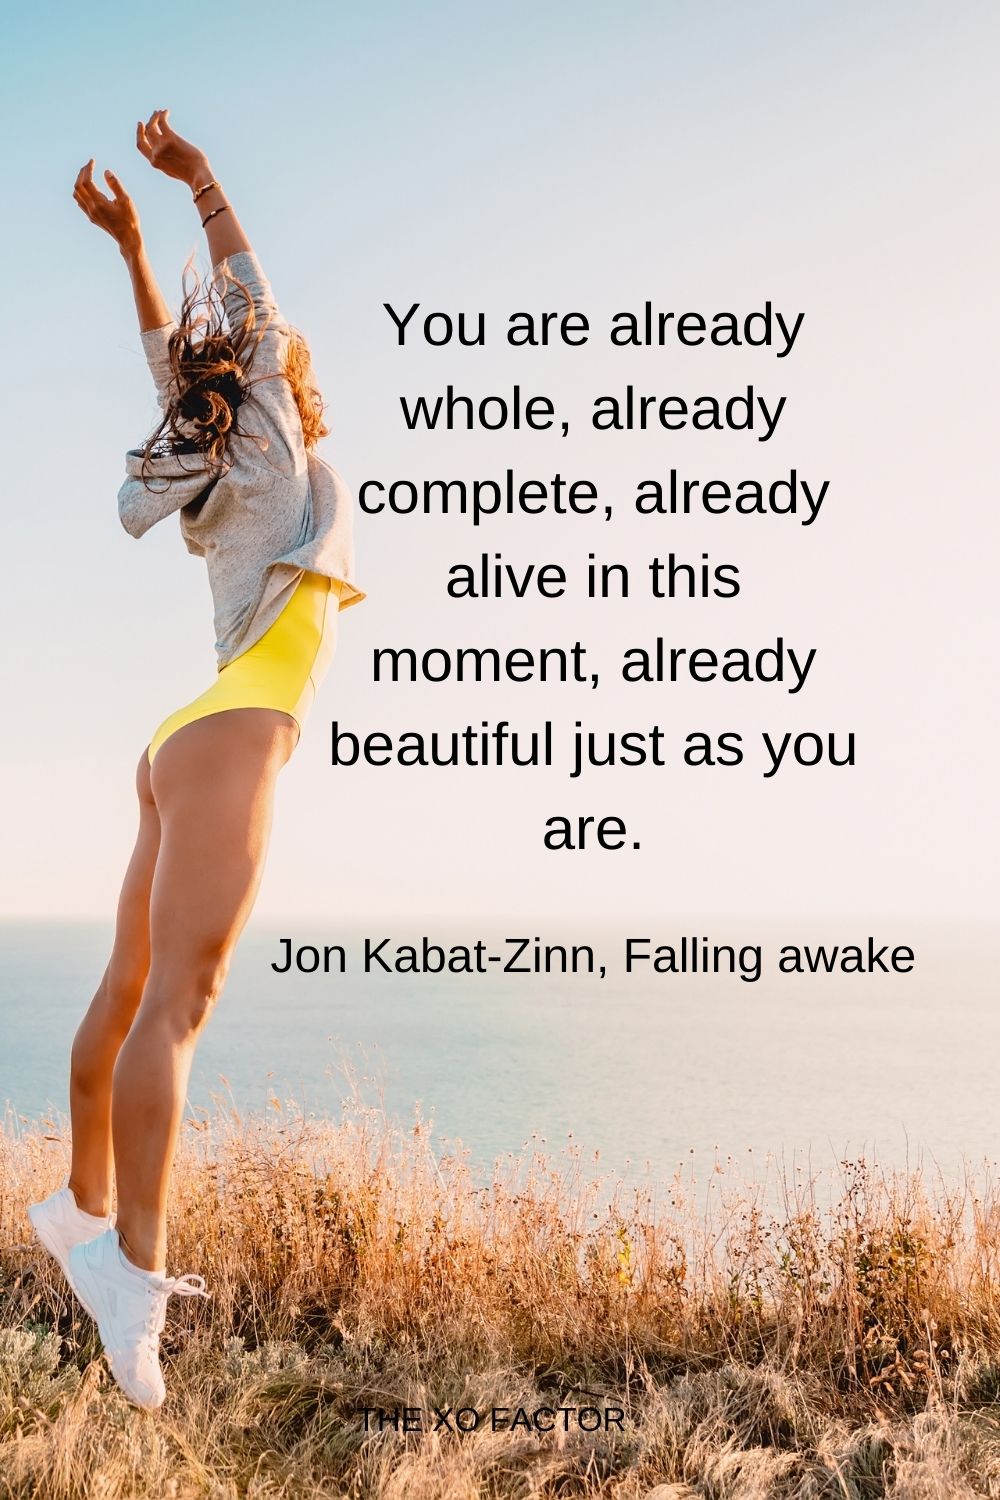 You are already whole, already complete, already alive in this moment, already beautiful just as you are.  Jon Kabat-Zinn, Falling awake